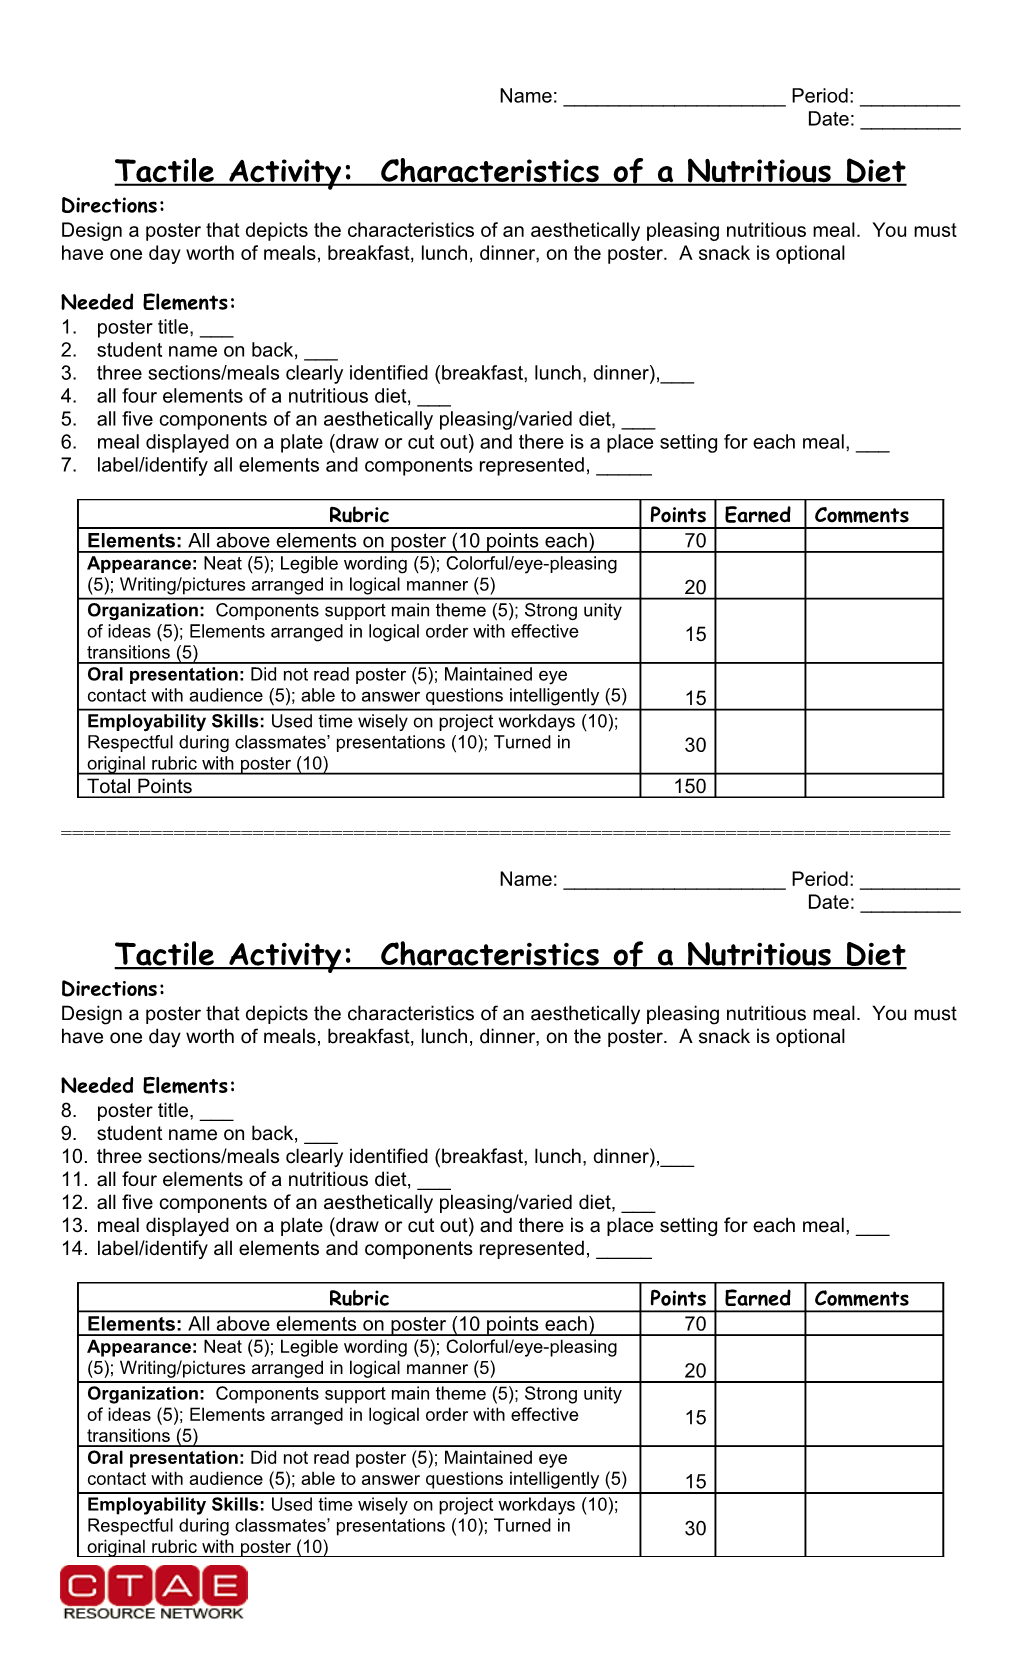 Tactile Activity: Characteristics of a Nutritious Diet